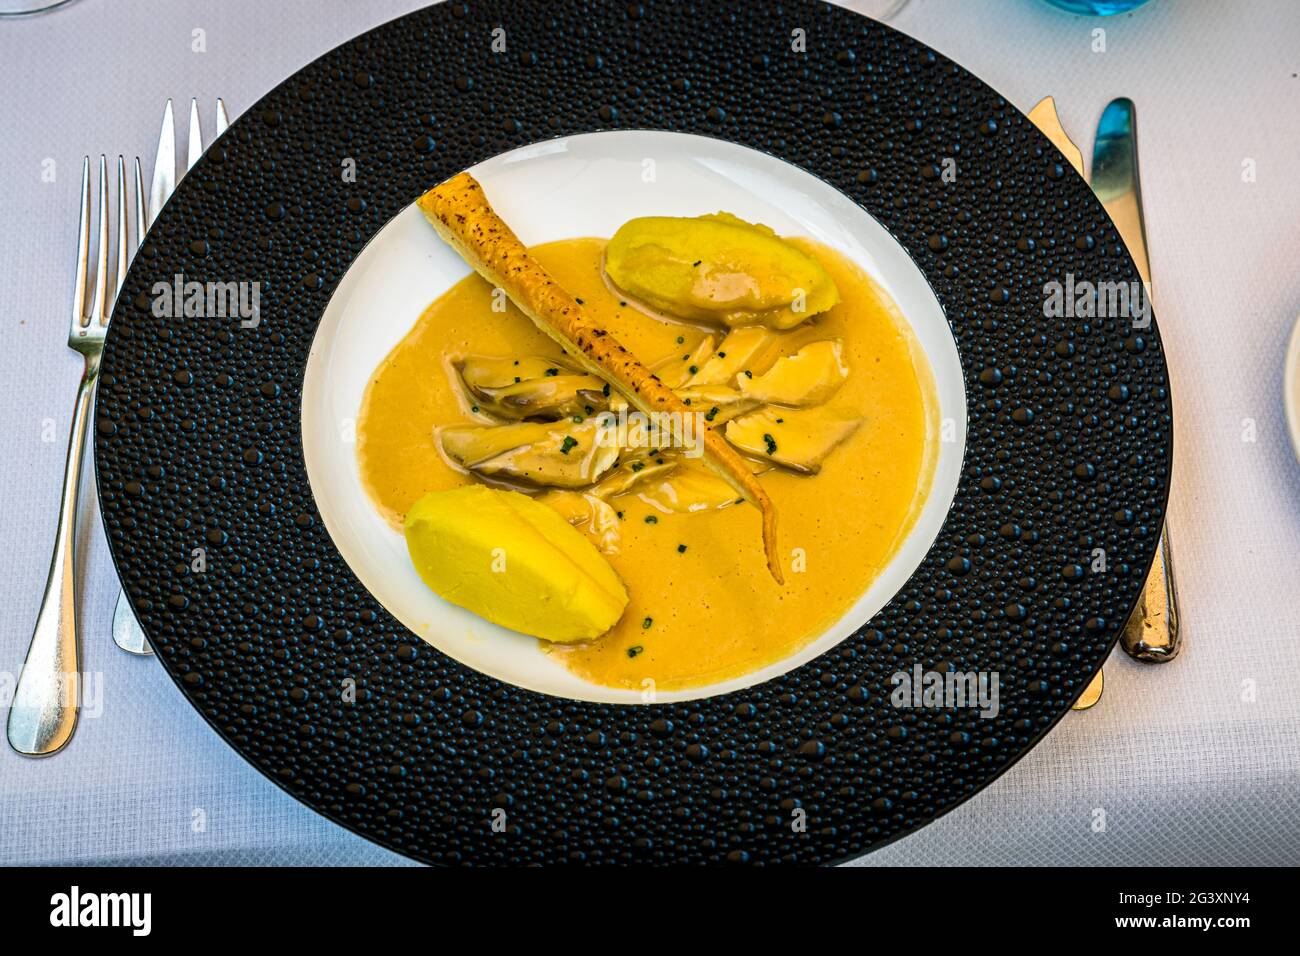 Plate with pike dish Stock Photo